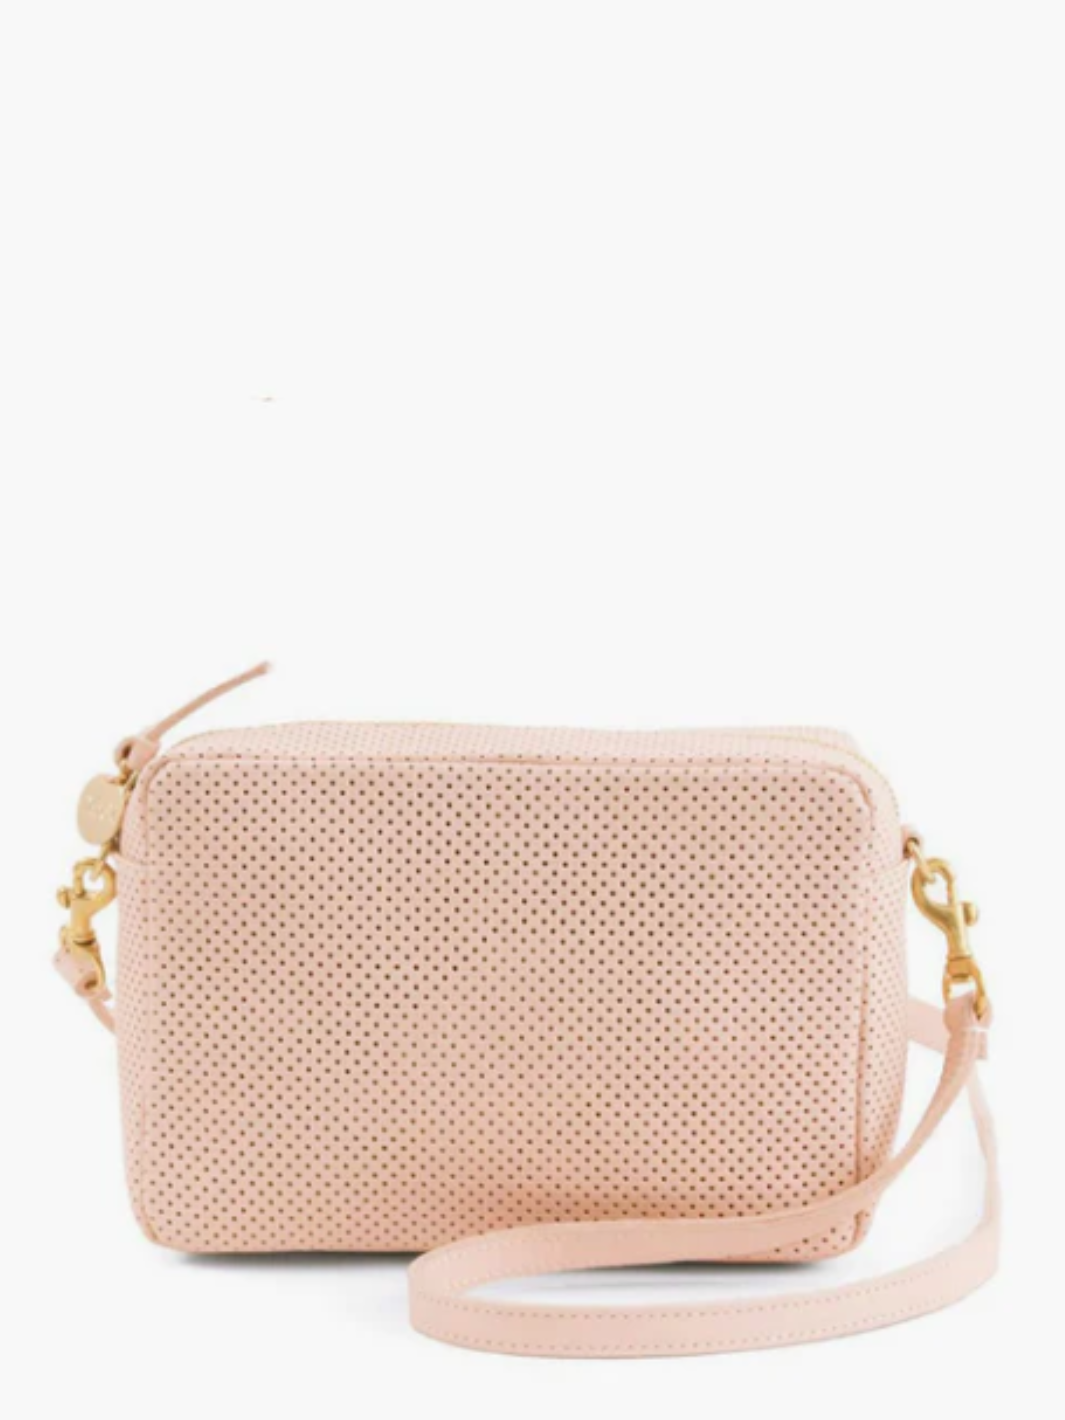 MIDI PERFORATED SAC IN BALLET - Romi Boutique